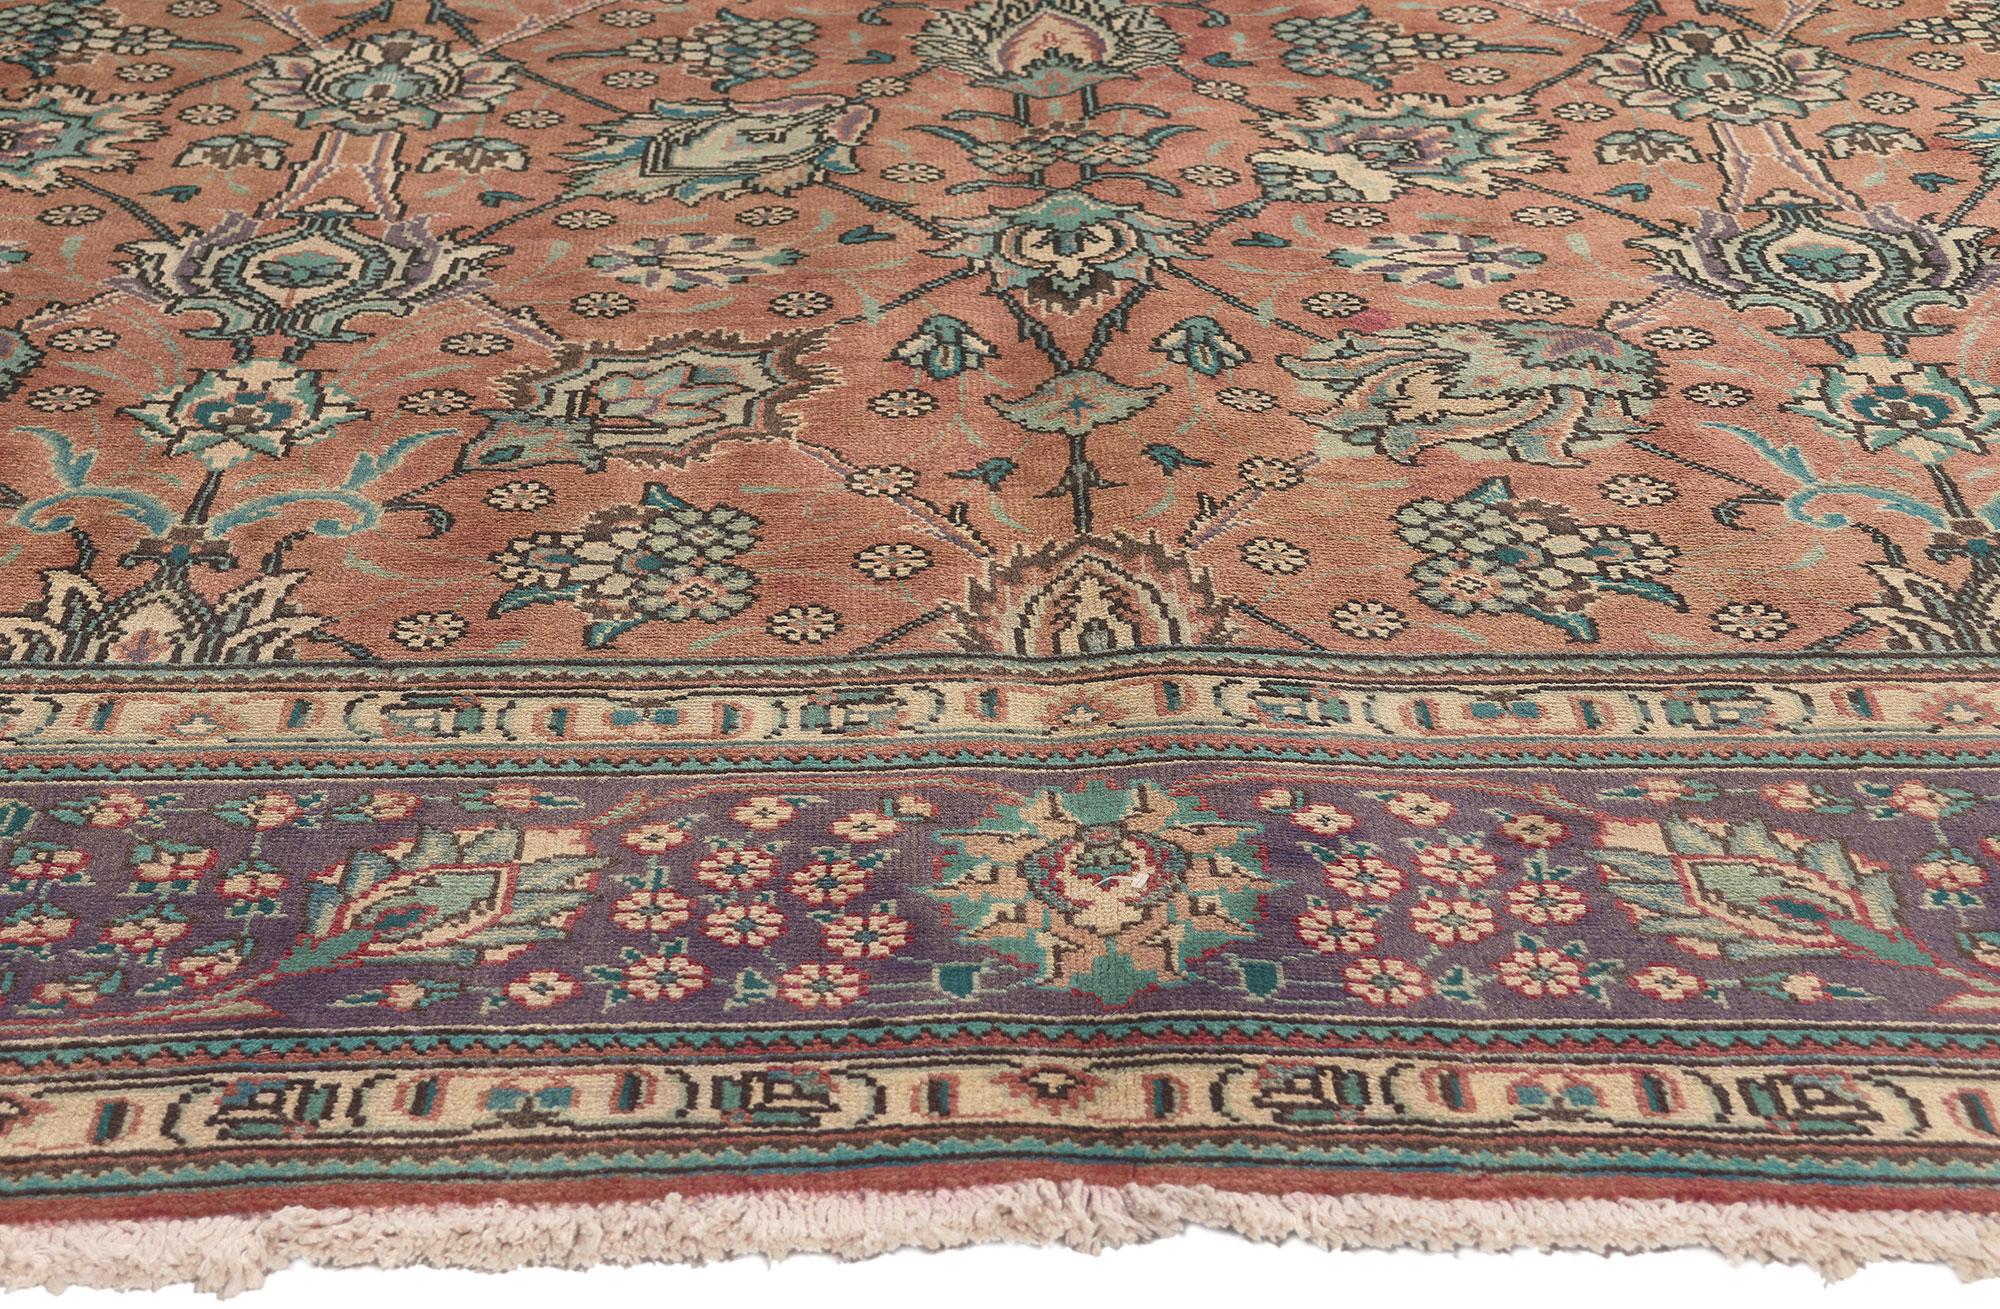 Vintage Persian Tabriz Rug, Traditional Sensibility Meets Nostalgic Charm In Good Condition For Sale In Dallas, TX